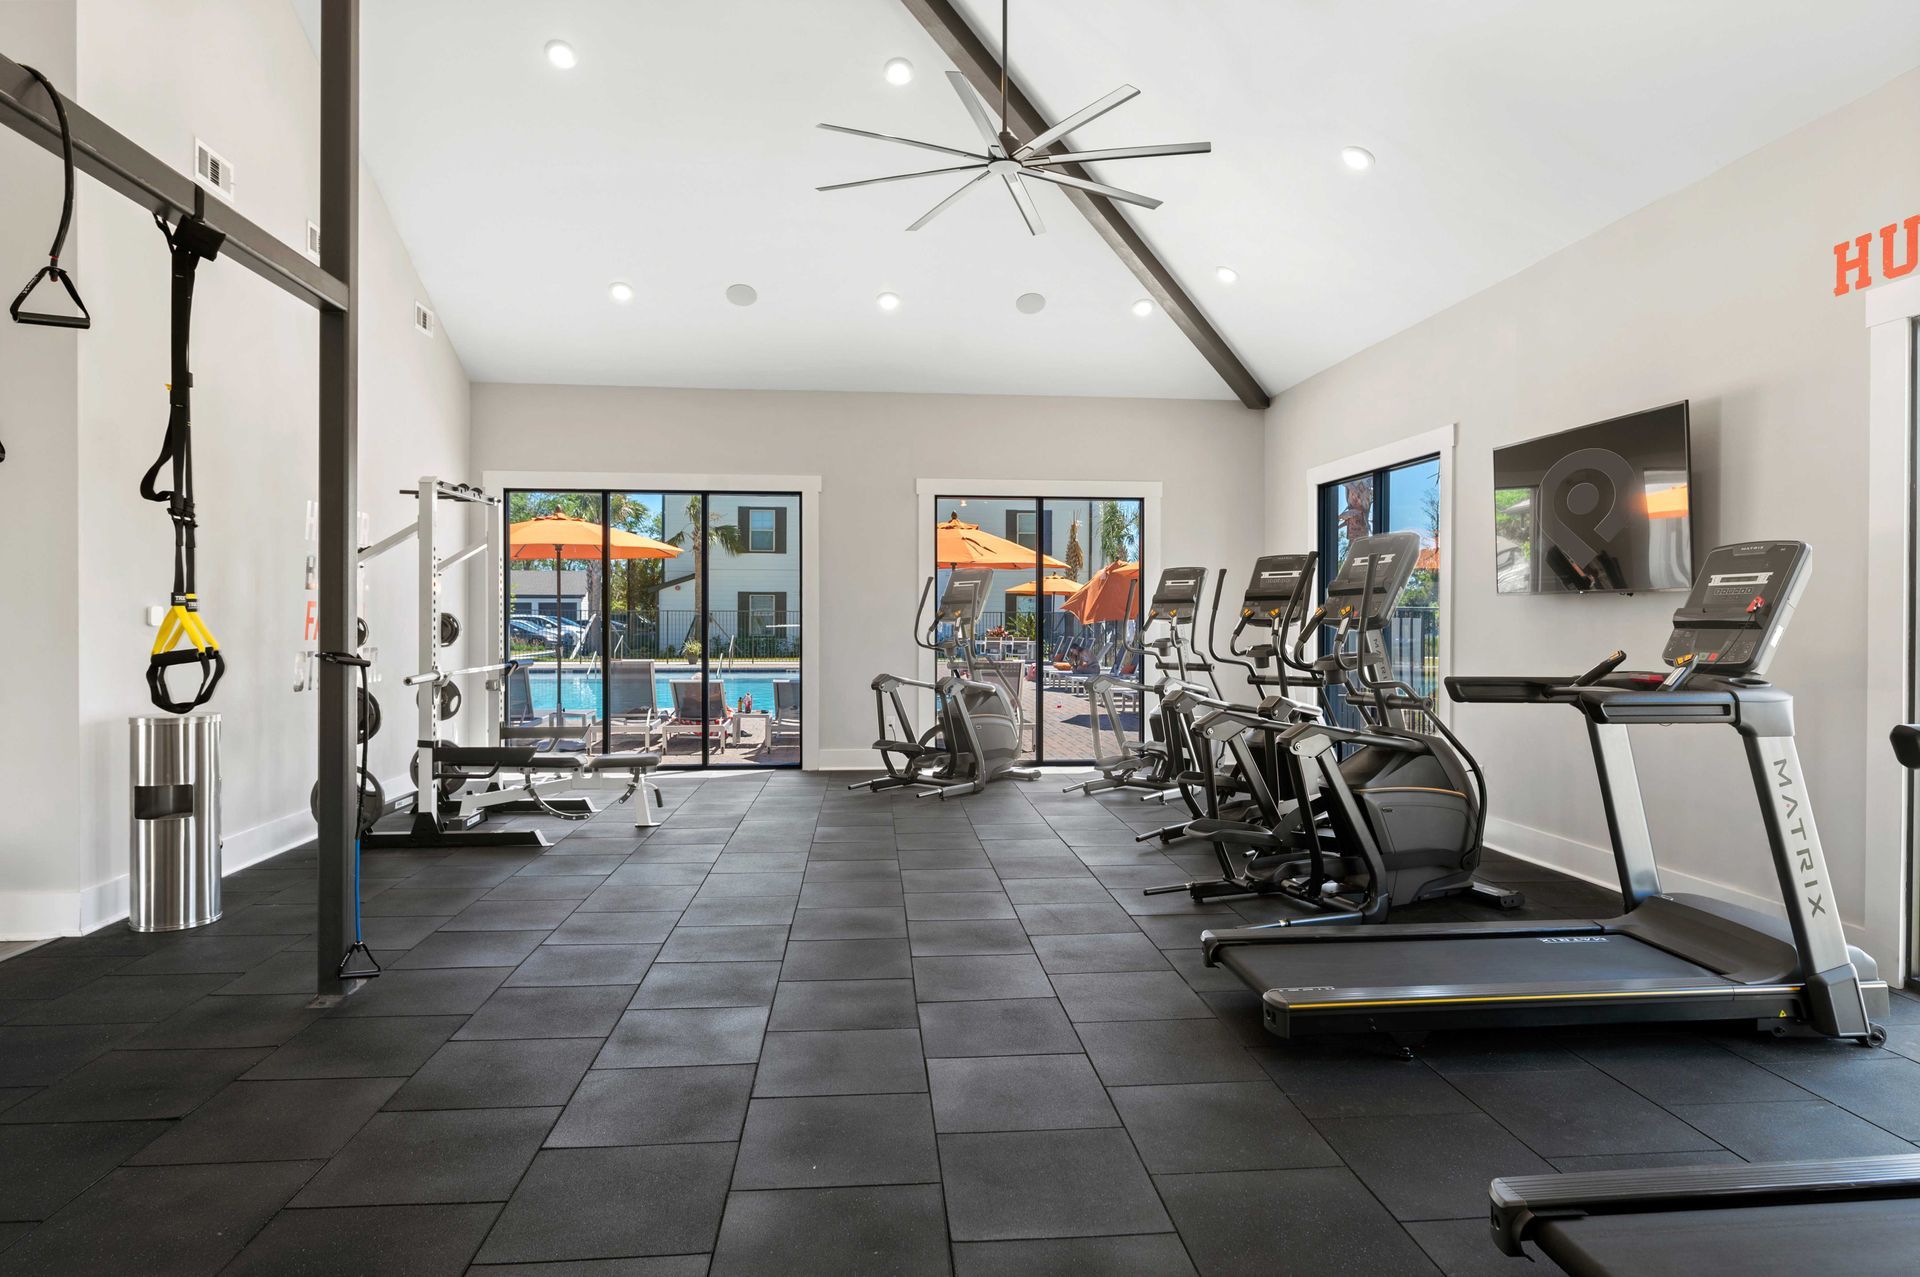 A large gym with treadmills, exercise bikes, and a ceiling fan.